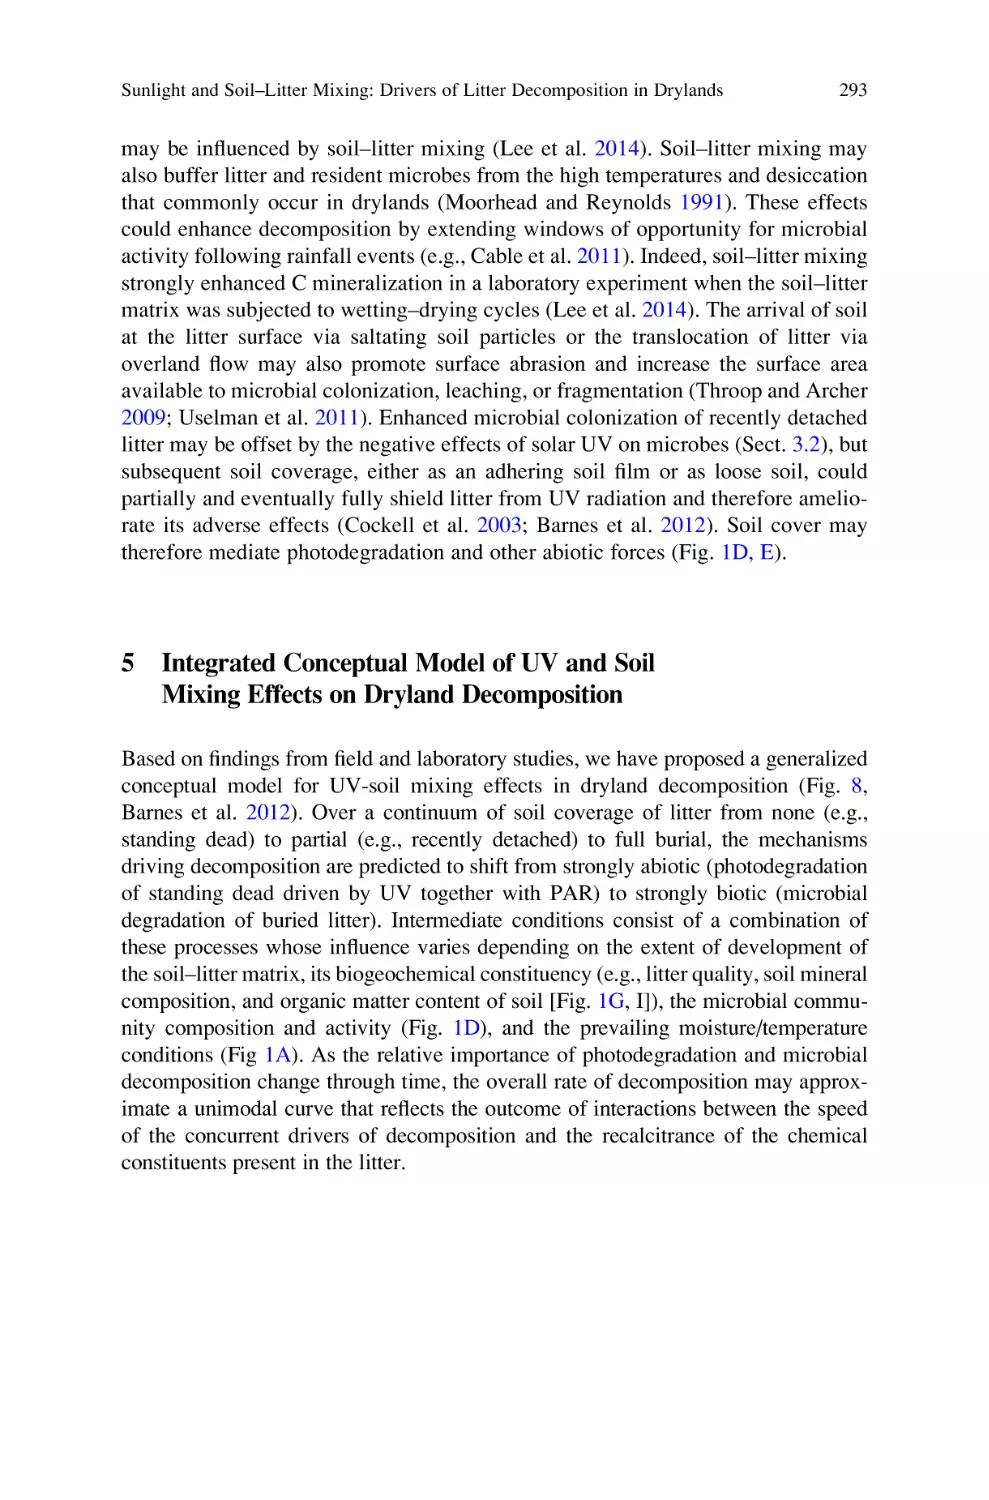 5 Integrated Conceptual Model of UV and Soil Mixing Effects on Dryland Decomposition